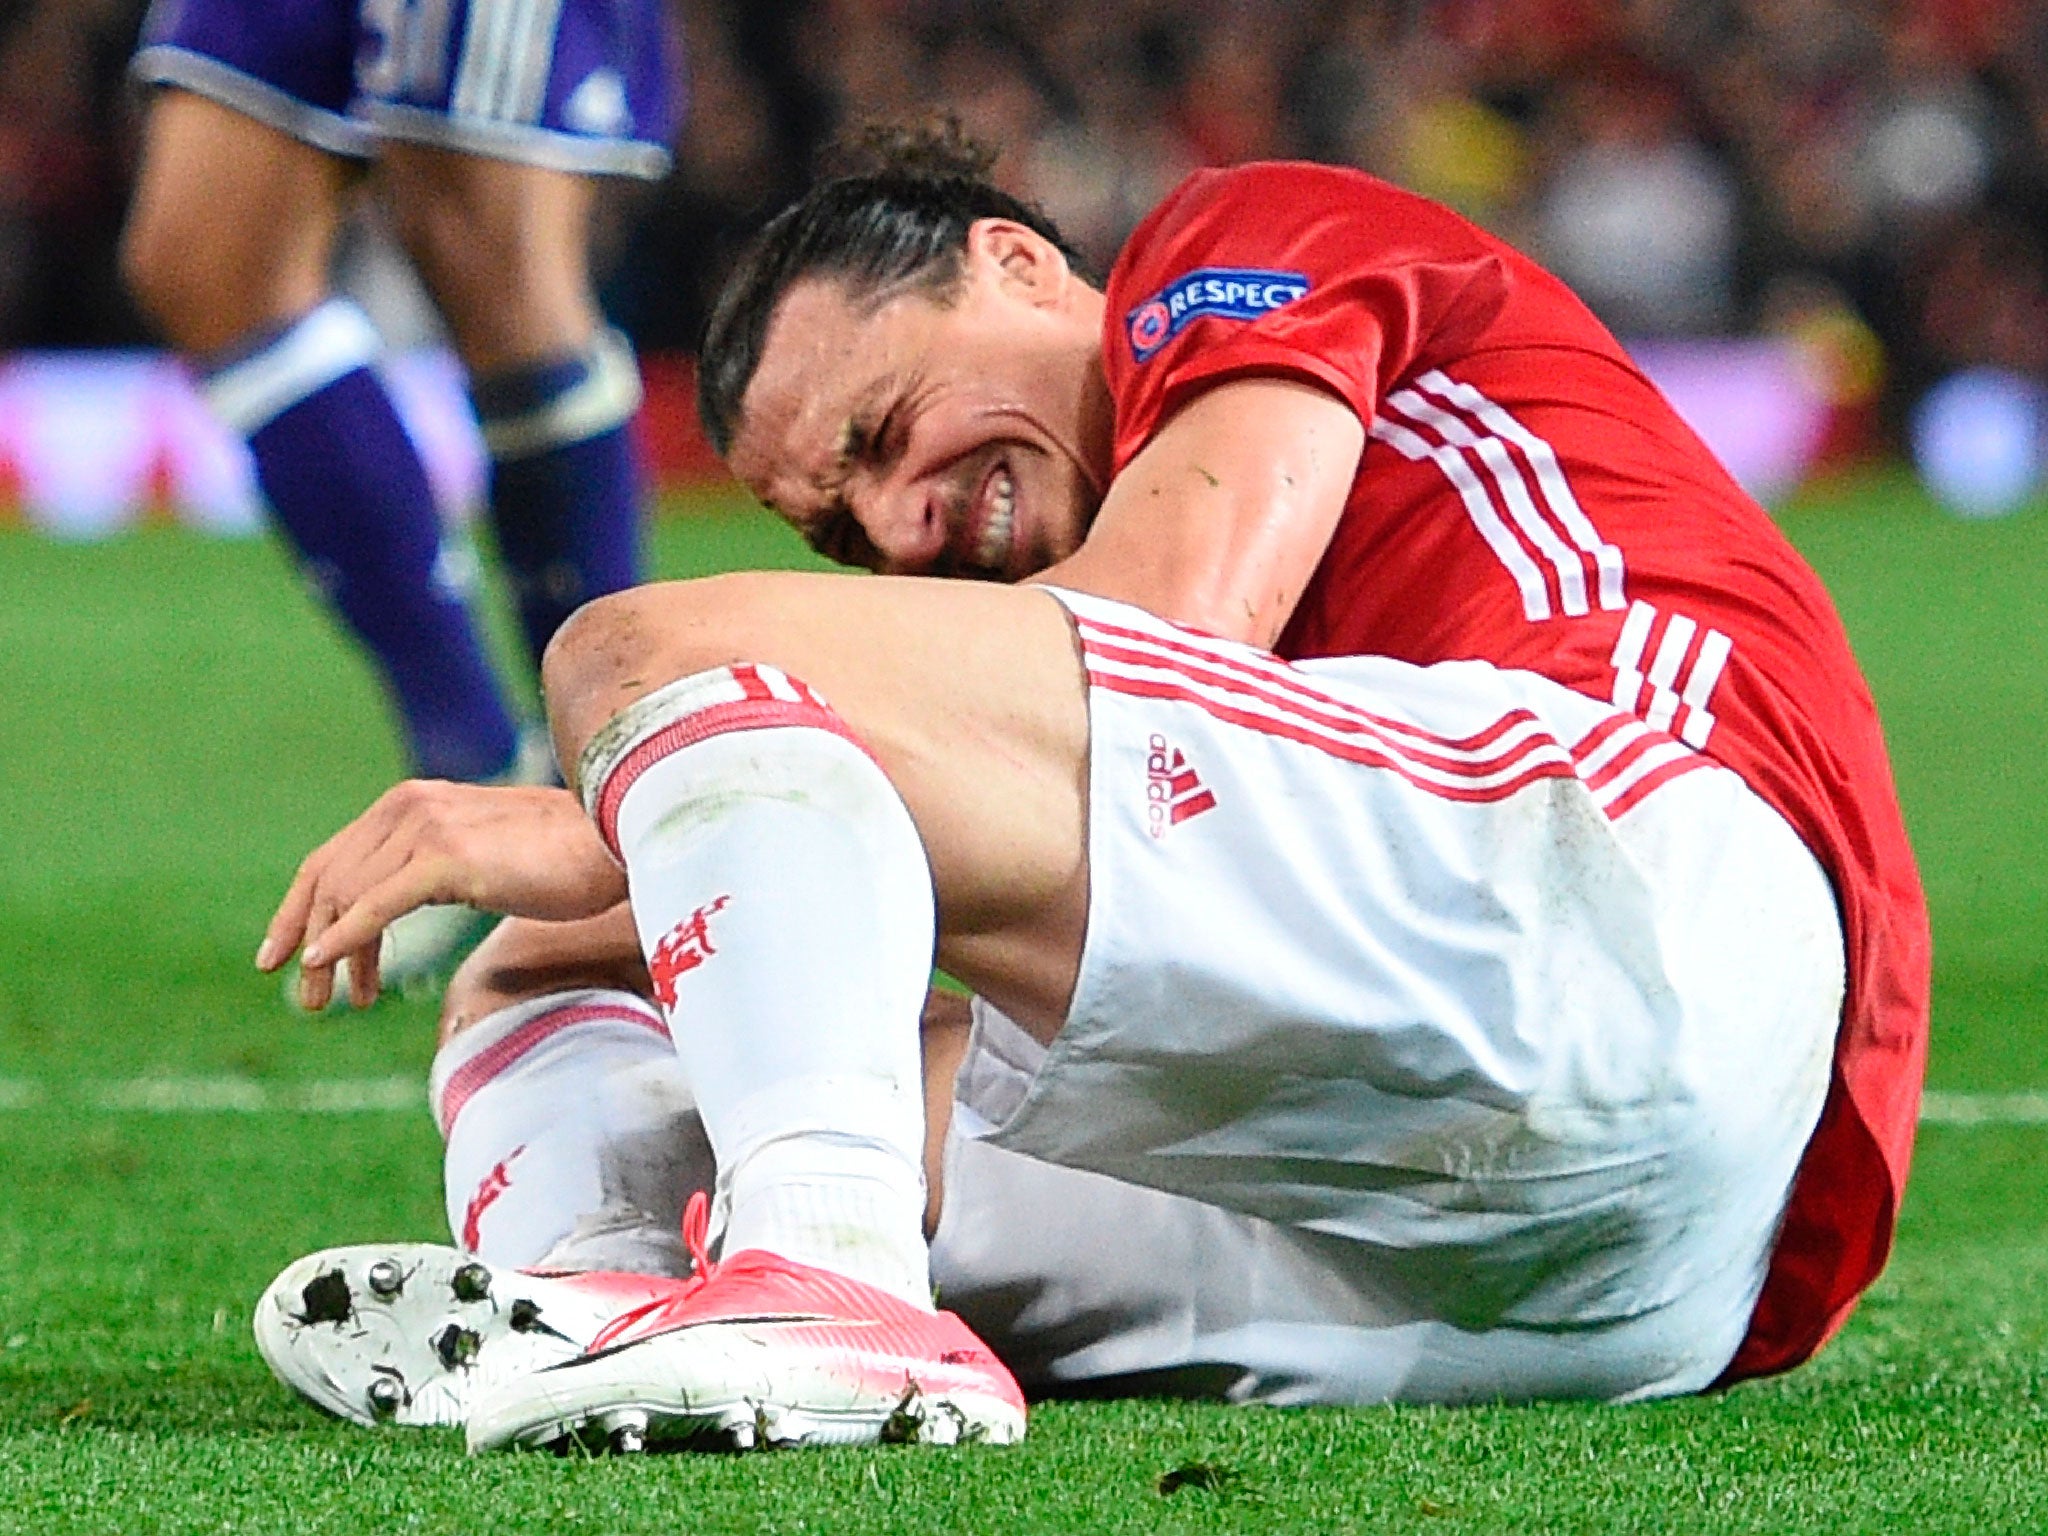 Zlatan Ibrahimovic won't play again this season after suffering a cruciate knee ligament injury